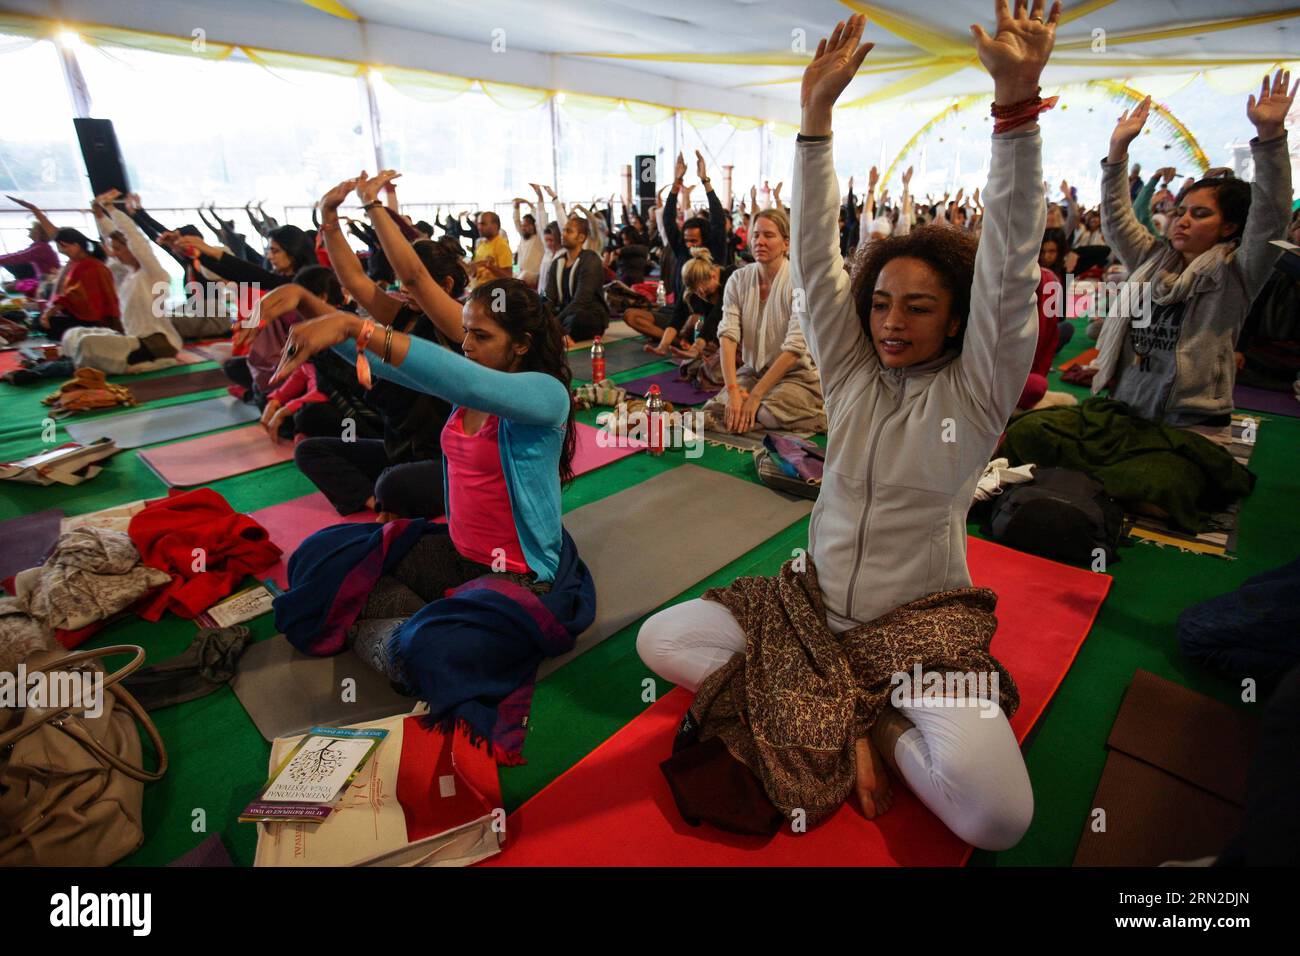 RISHIKESH, March 1, 2015 -- Yoga practitioners practise at the opening  ceremony of the 16th International Yoga Festival in Rishikesh of  Uttarakhand, India, March 1, 2015. The 7-day event this year attracted